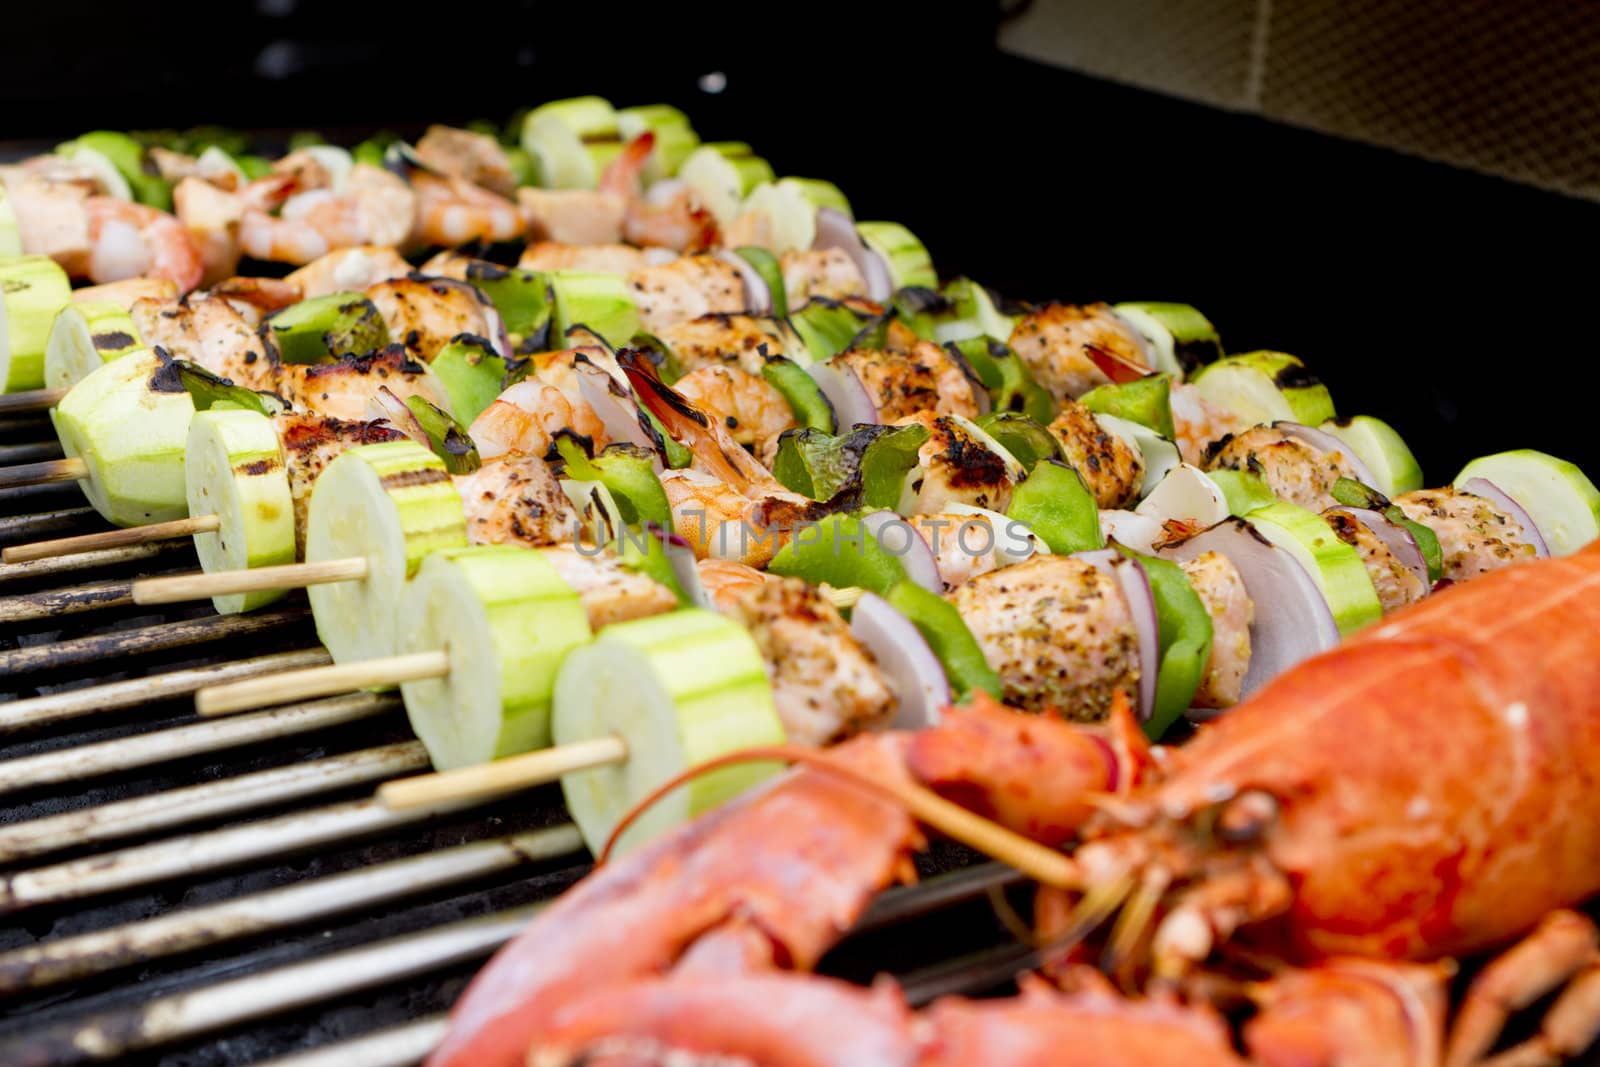 Salmon and Vegetable Skewers and Lobster are on the barbecue.